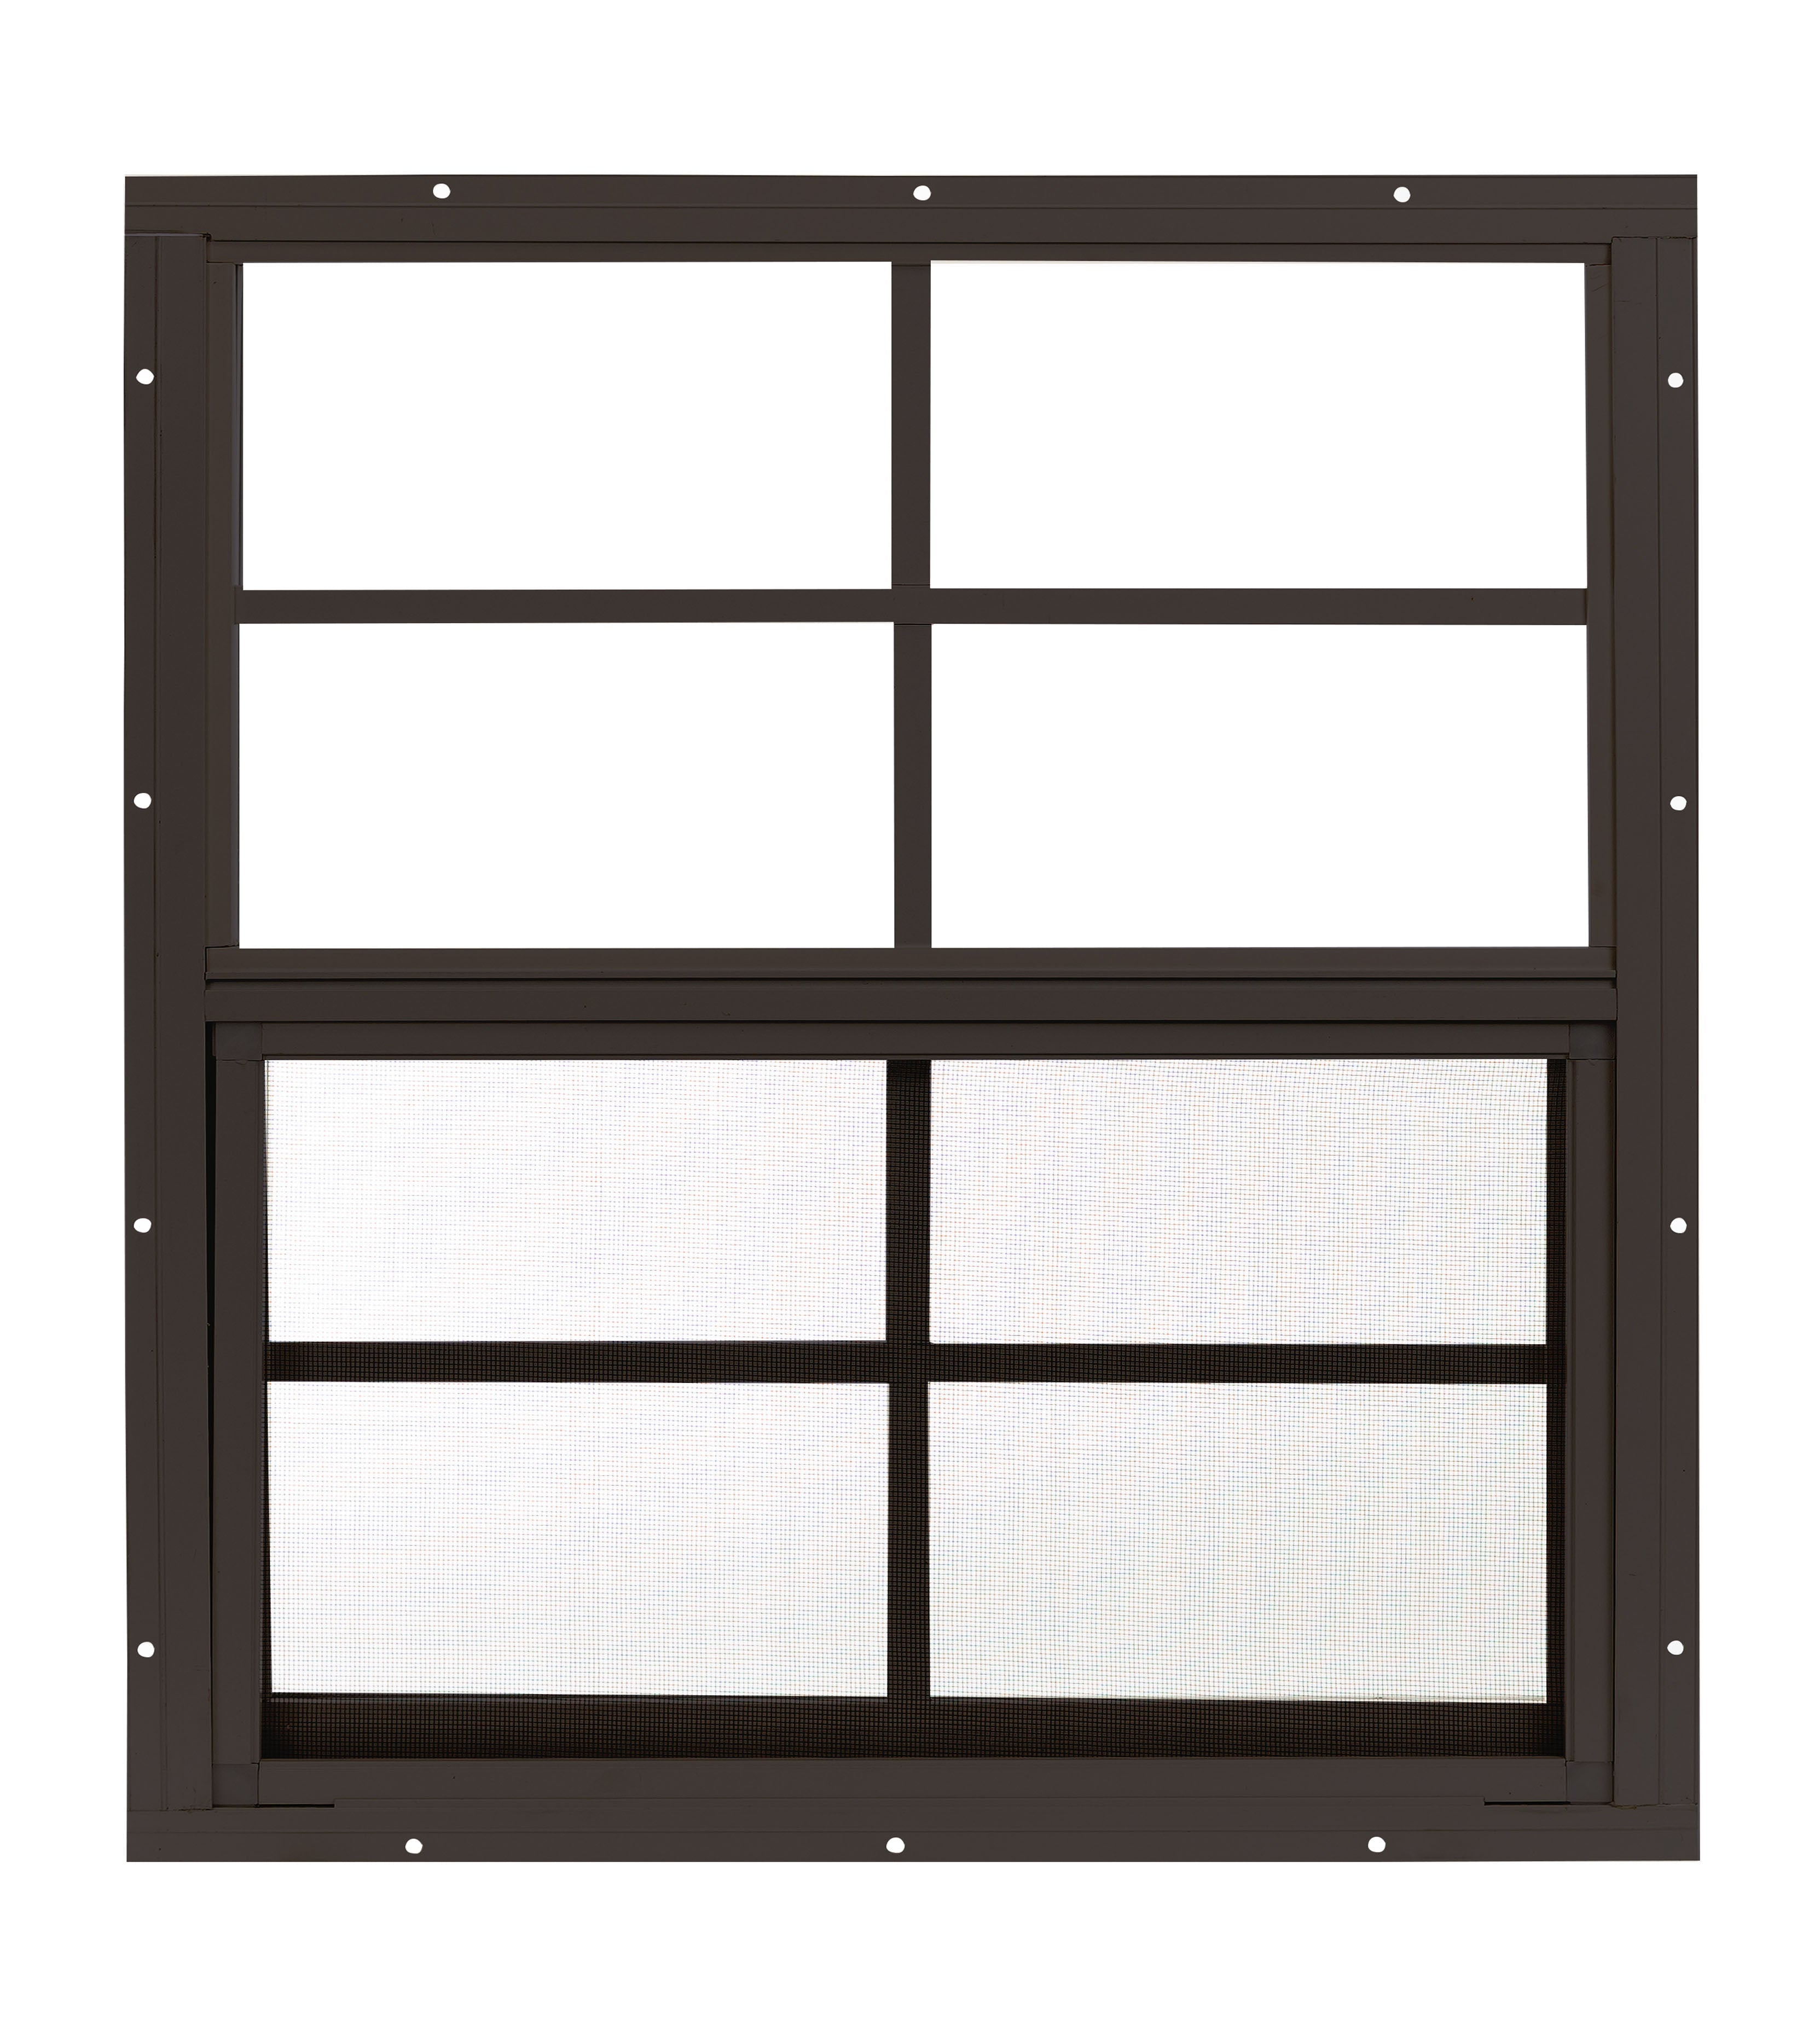 24" W x 27" H Single Hung Flush Mount Shed Window  with 4 Grids for Sheds, Playhouses, and MORE